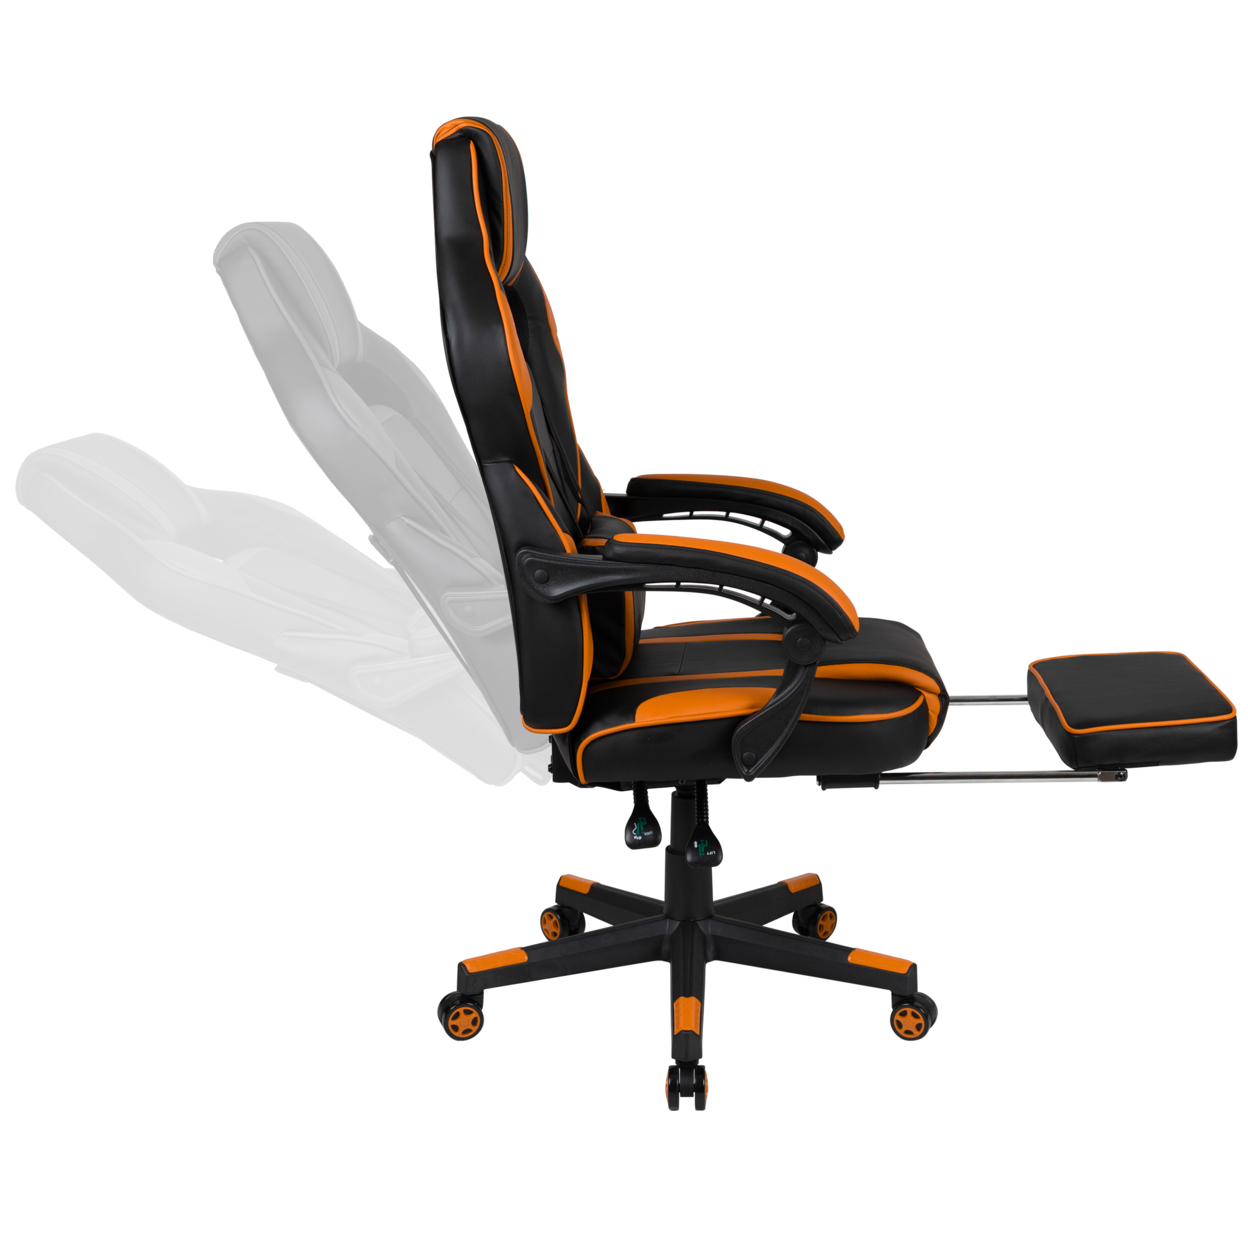 X40 Gaming Chair Racing Ergonomic Computer Chair With Fully Reclining Back And Arms, Slide-Out Footrest, Massaging Lumbar, Black And Orange